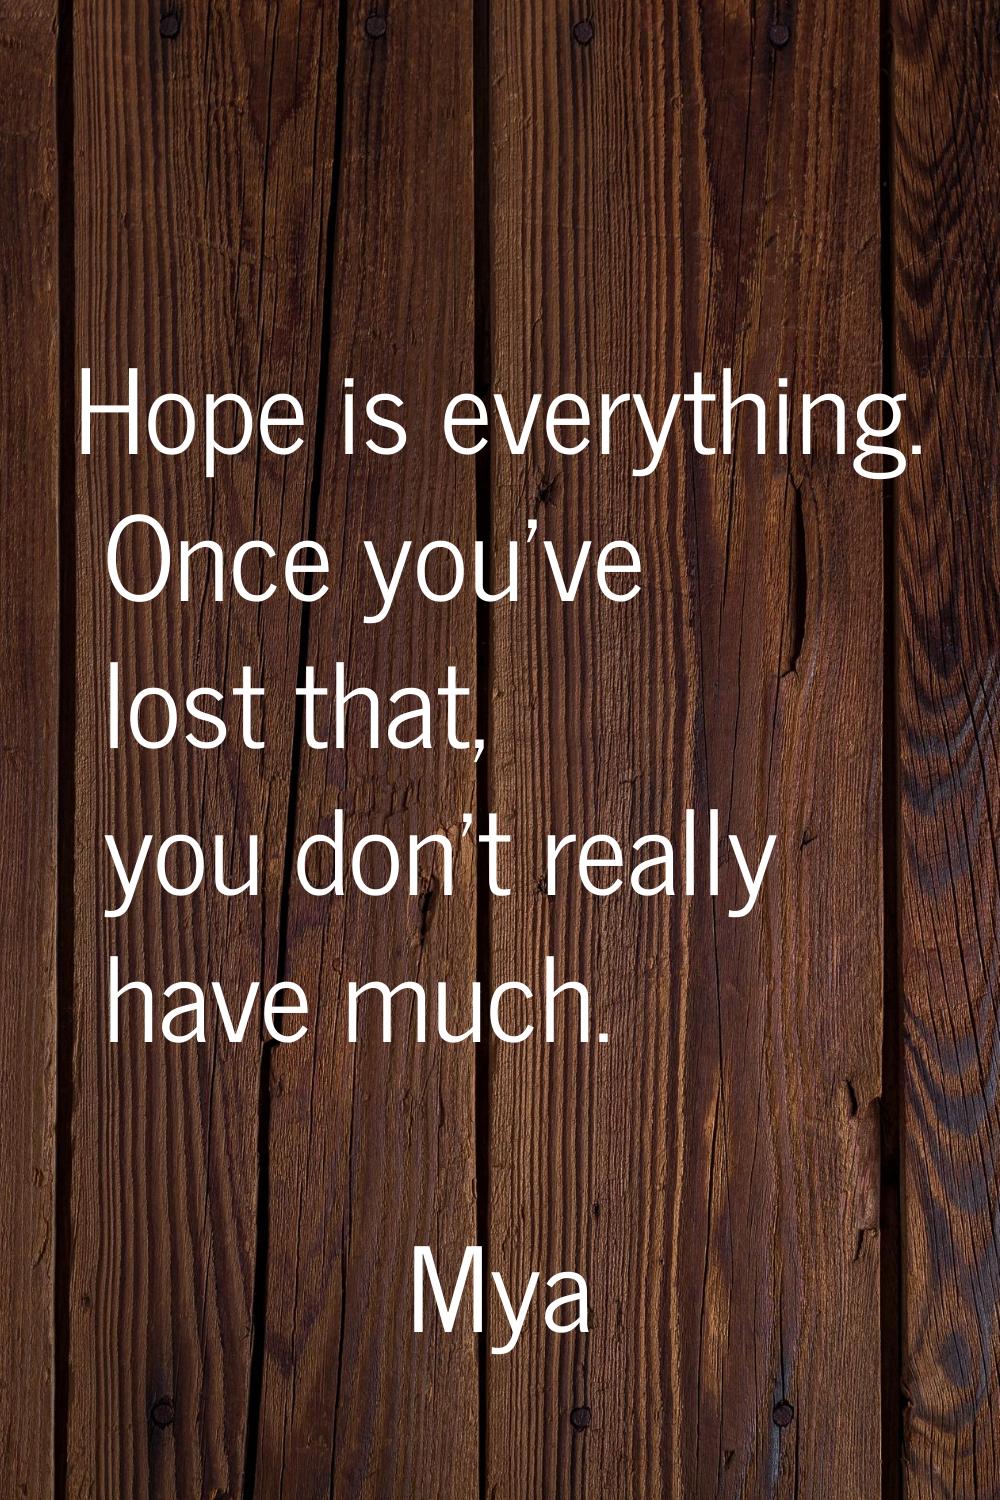 Hope is everything. Once you've lost that, you don't really have much.